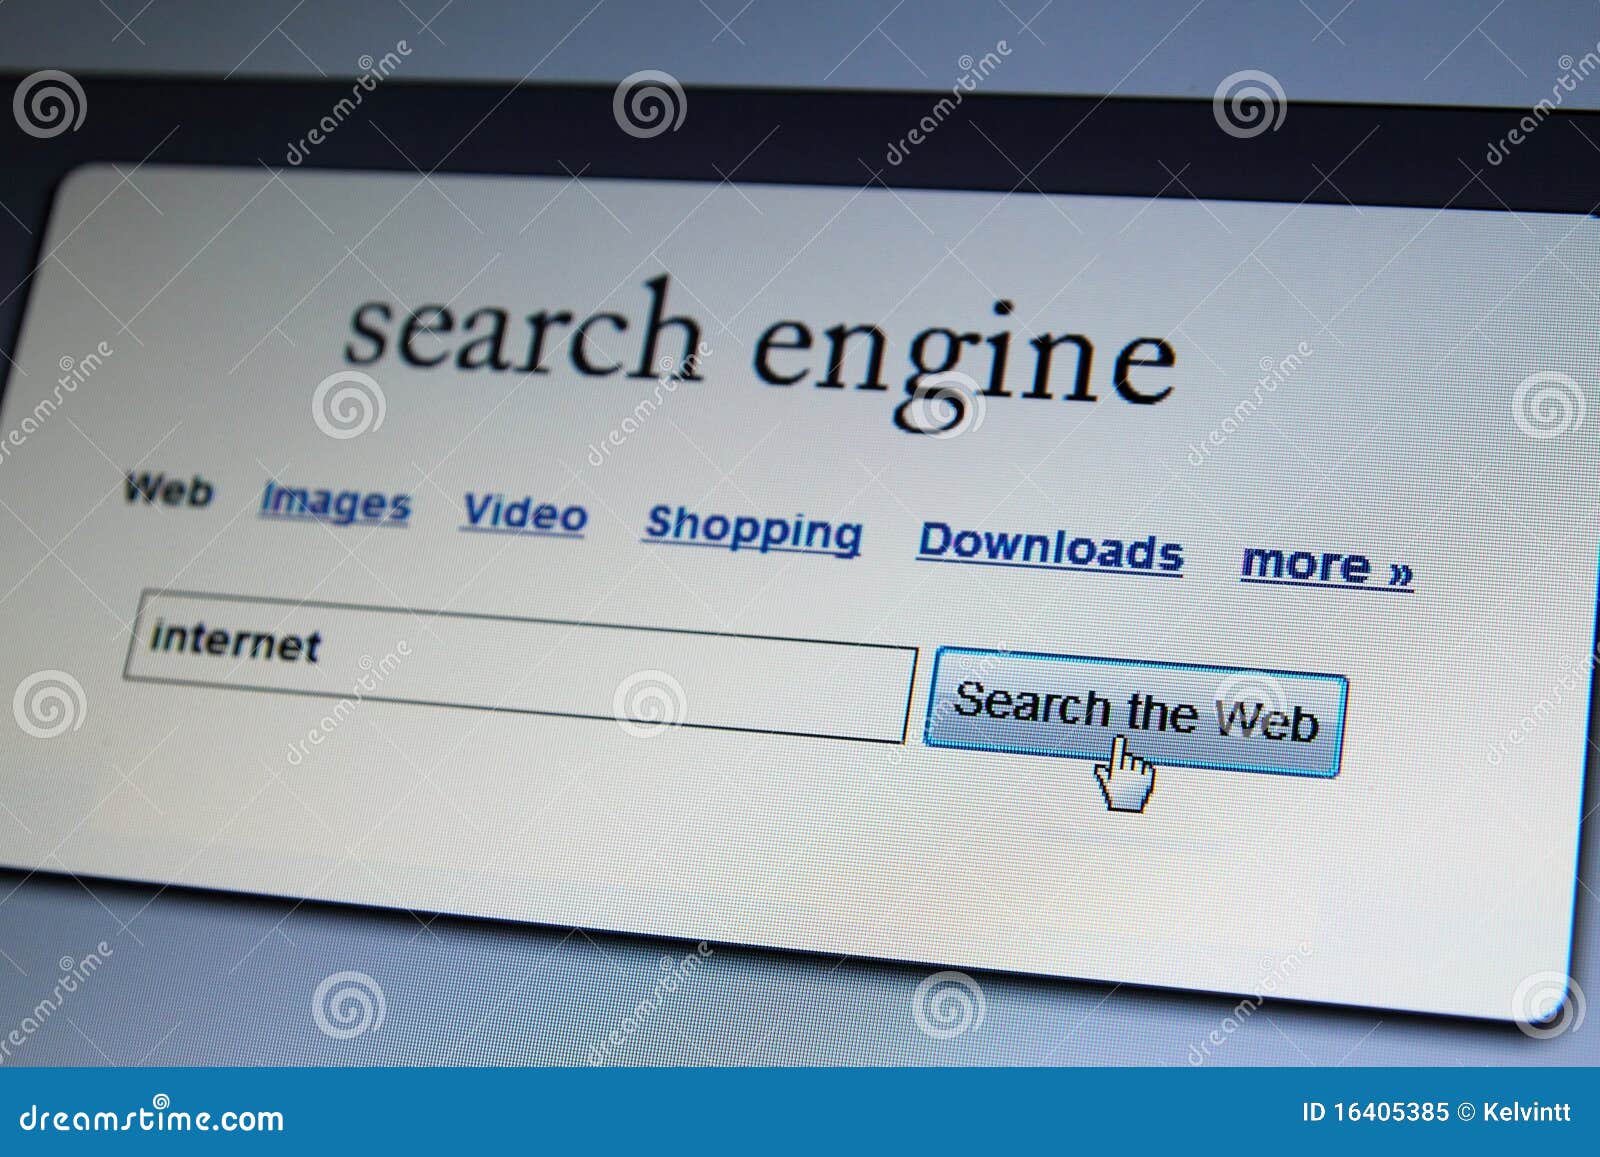 search the internet